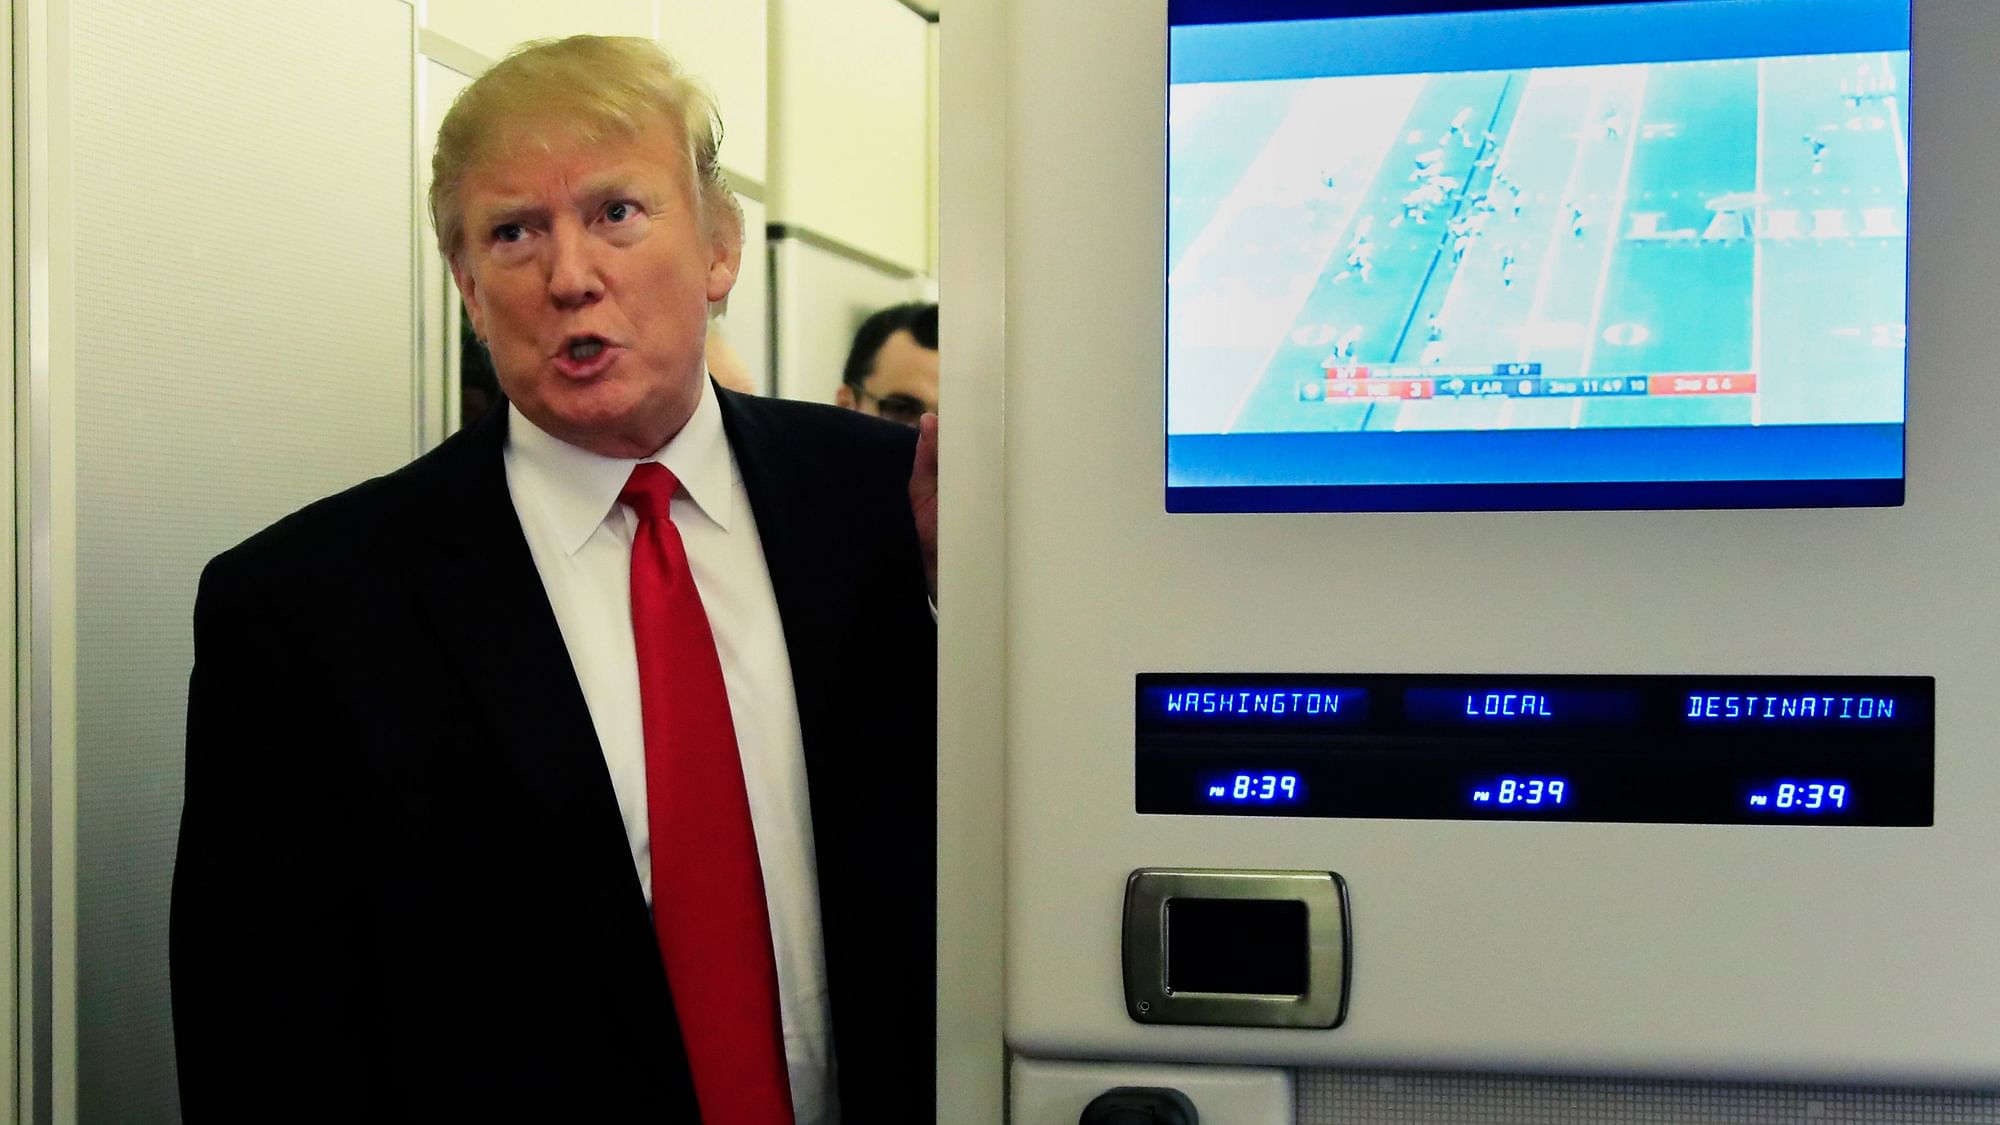 President Donald Trump speaks to reporters onboard Air Force One, on Sunday, 3 February 2019, on his way back to the White House in Washington from a weekend at his Mar-a-Lago estate in Palm Beach, Fla.